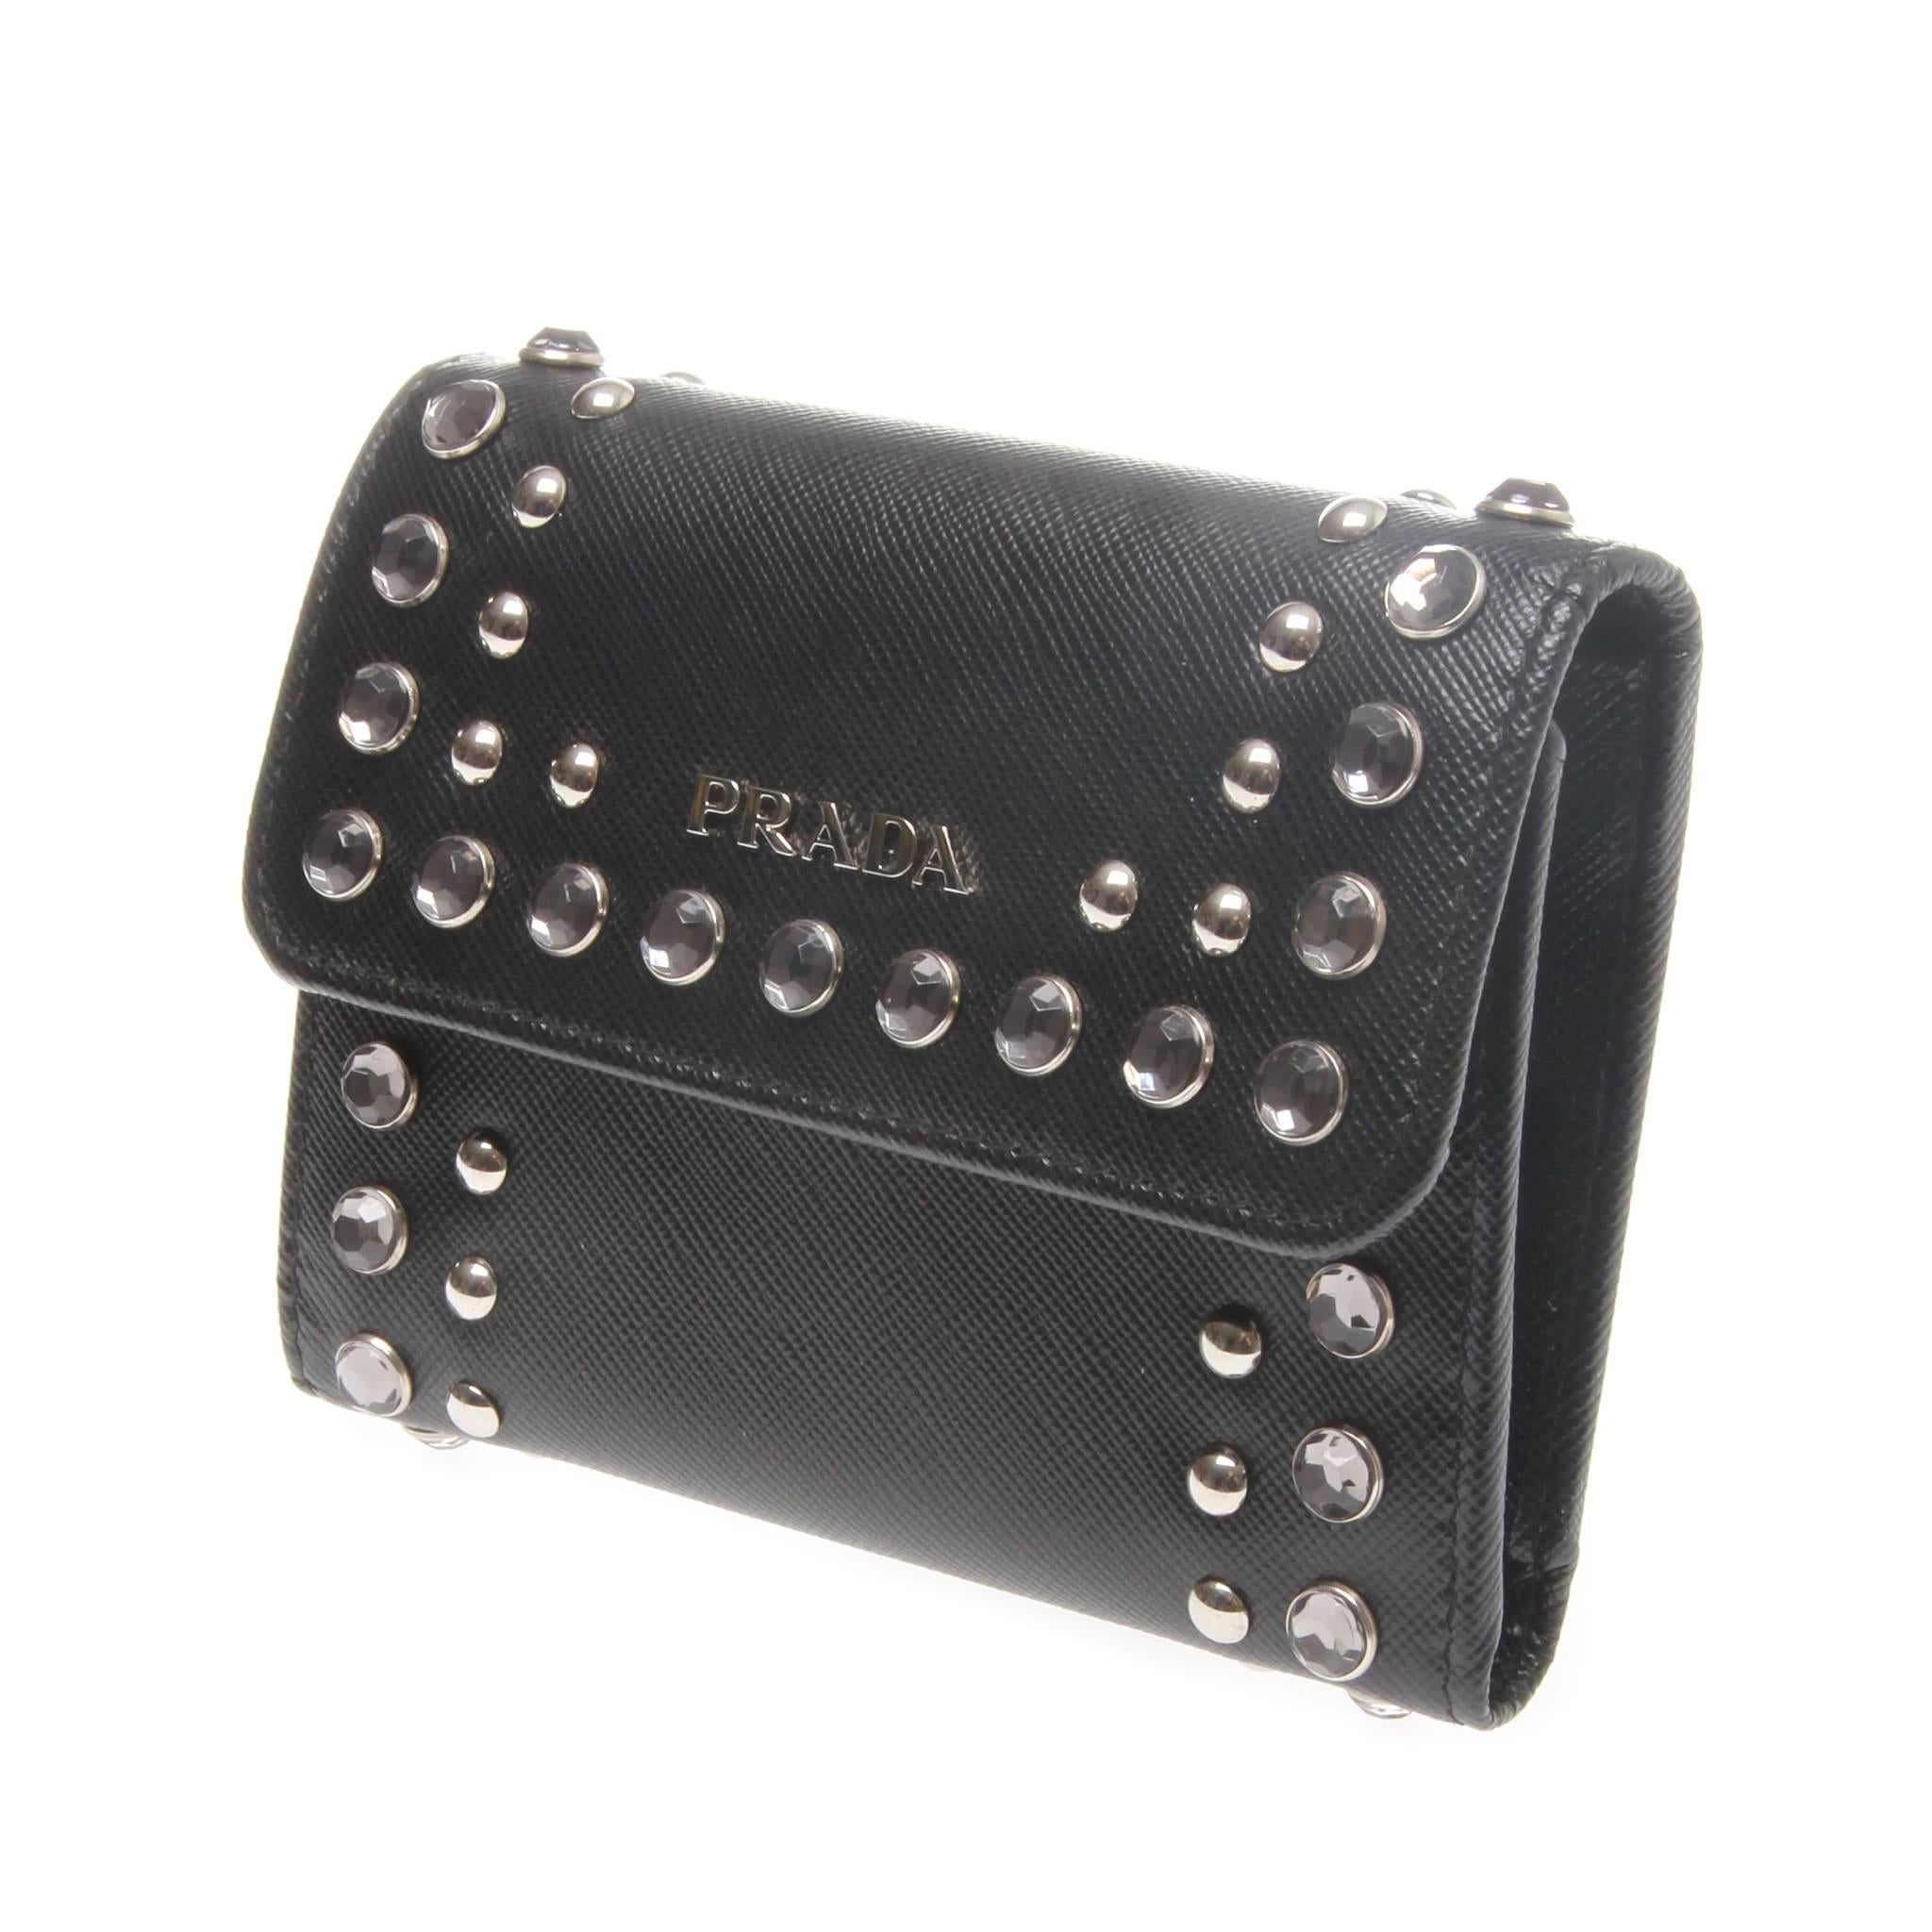 Prada navy saffiano tri-fold wallet embellished with clear crystals and silver tone metal studs. Featuring push stud closure at front flap, card slots, push stud coin compartment and a bill section. 

Original box 